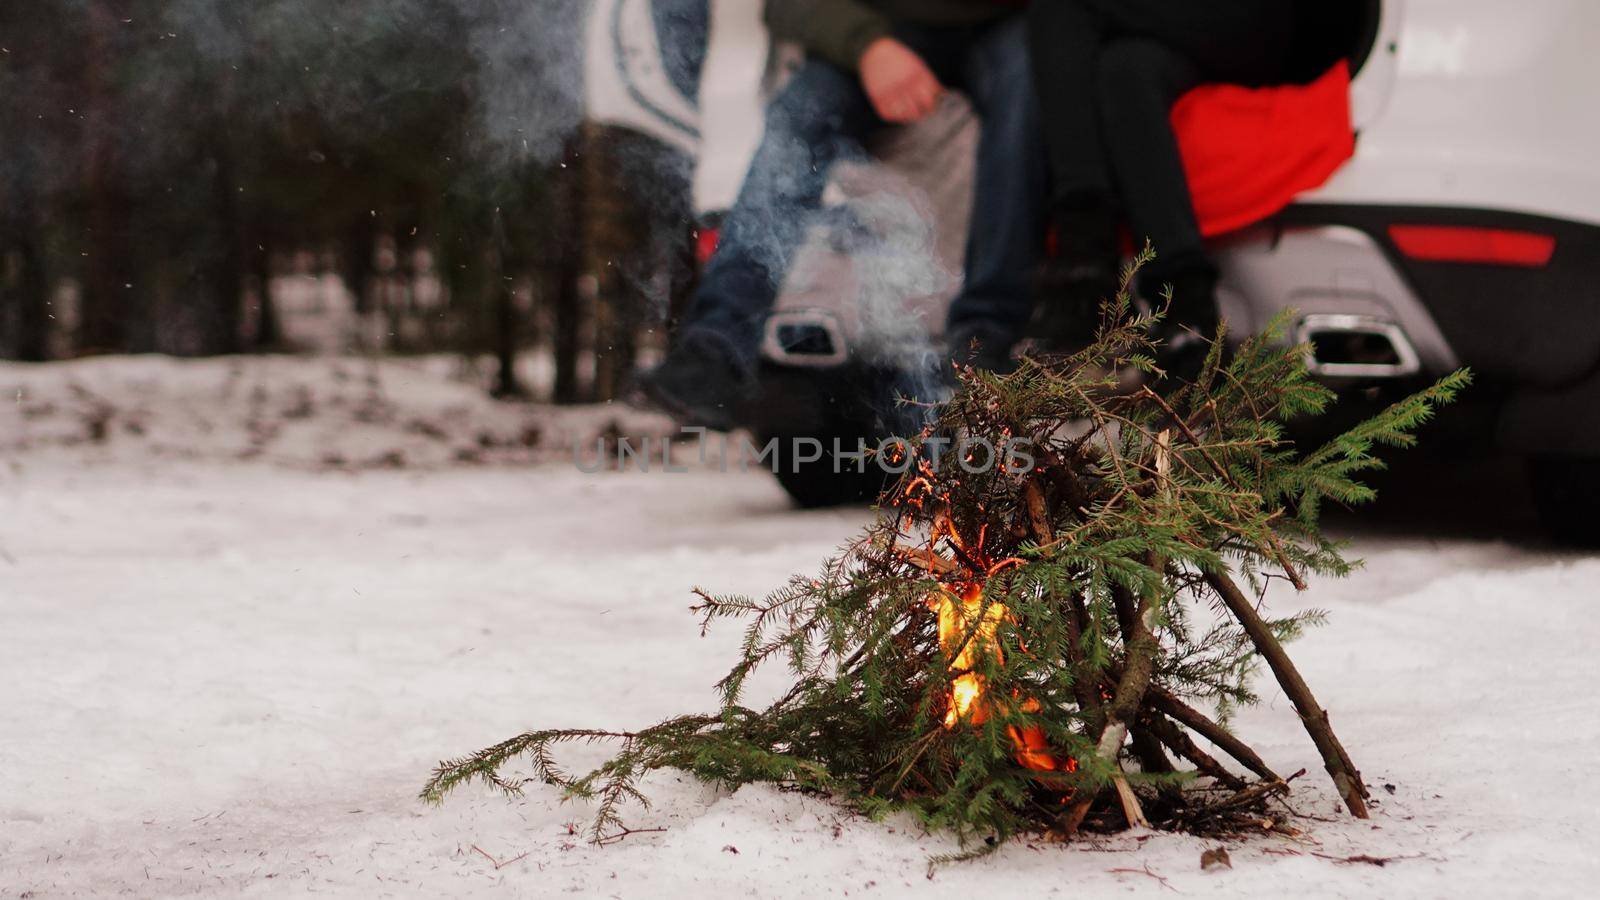 Bonfire of fir branches in the winter forest - Loving couple in truck at blurred background